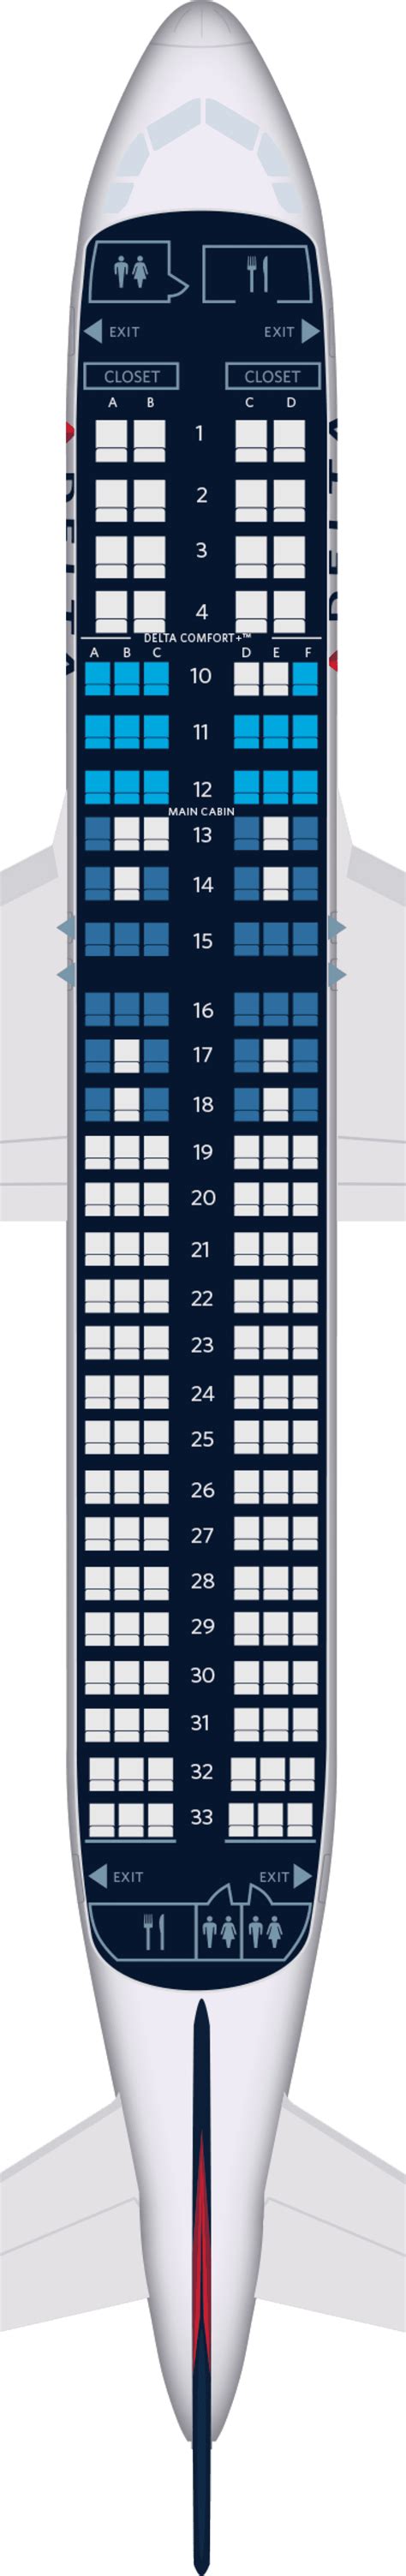 Seat Map Airbus A Delta Air Lines Best Seats In The Plane Sexiz Pix